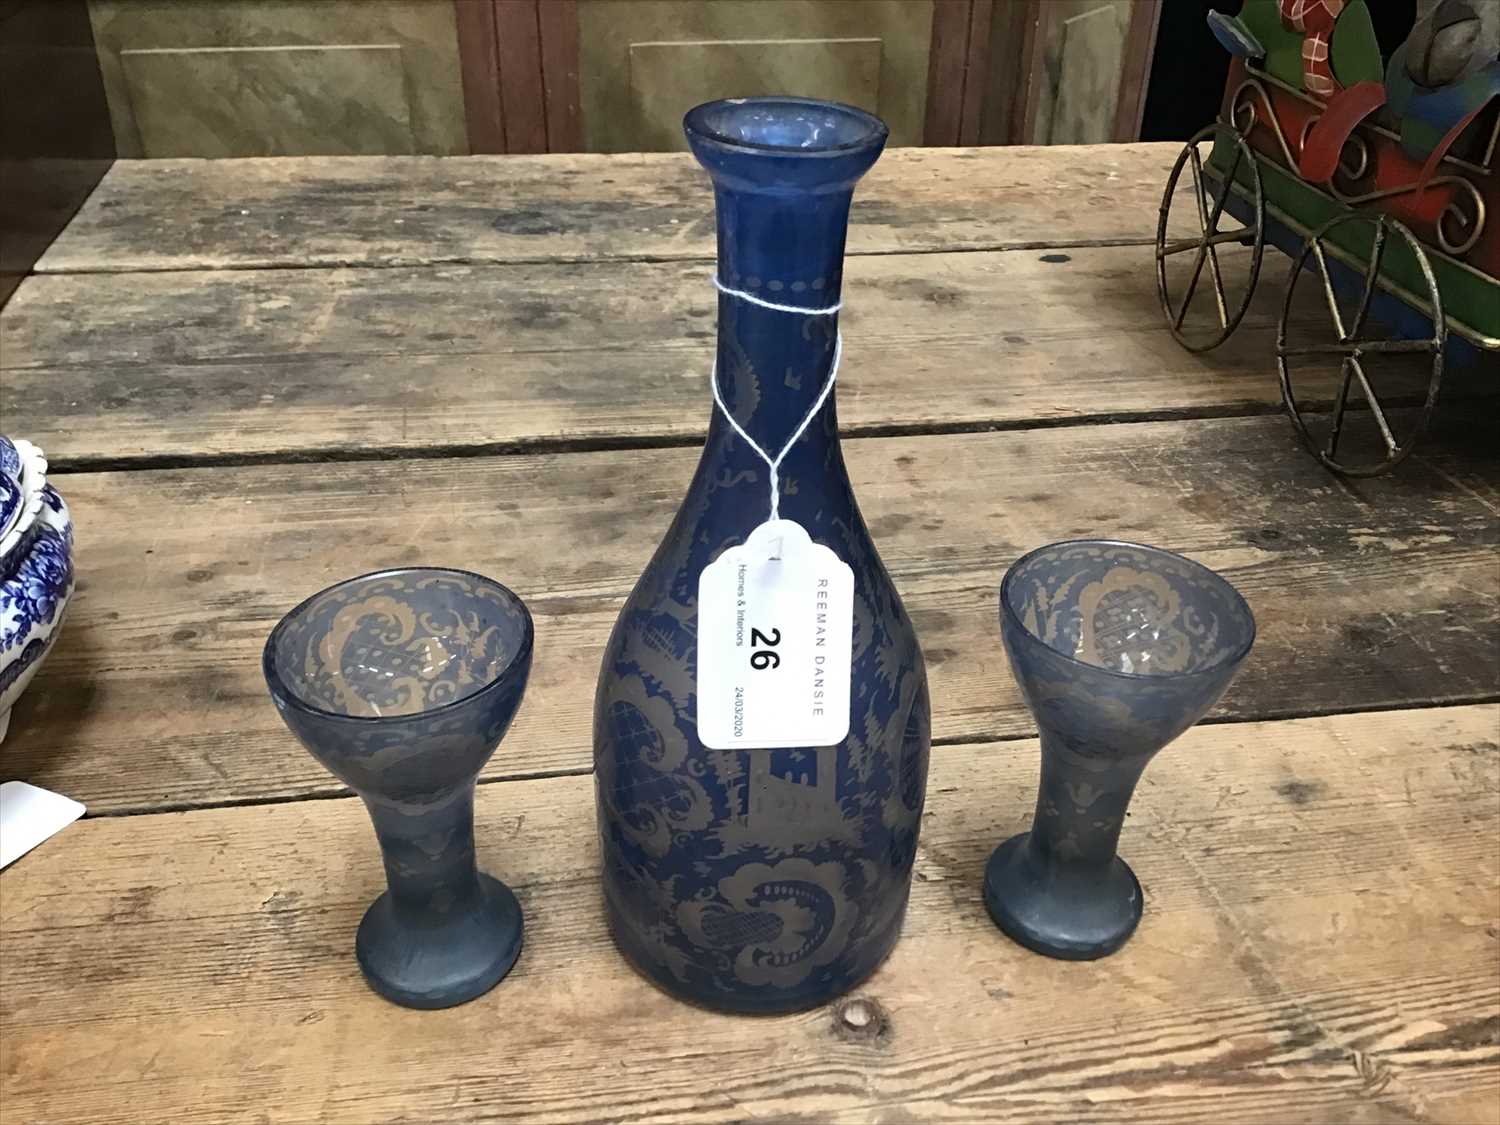 A Bohemian glass decanter and two glasses